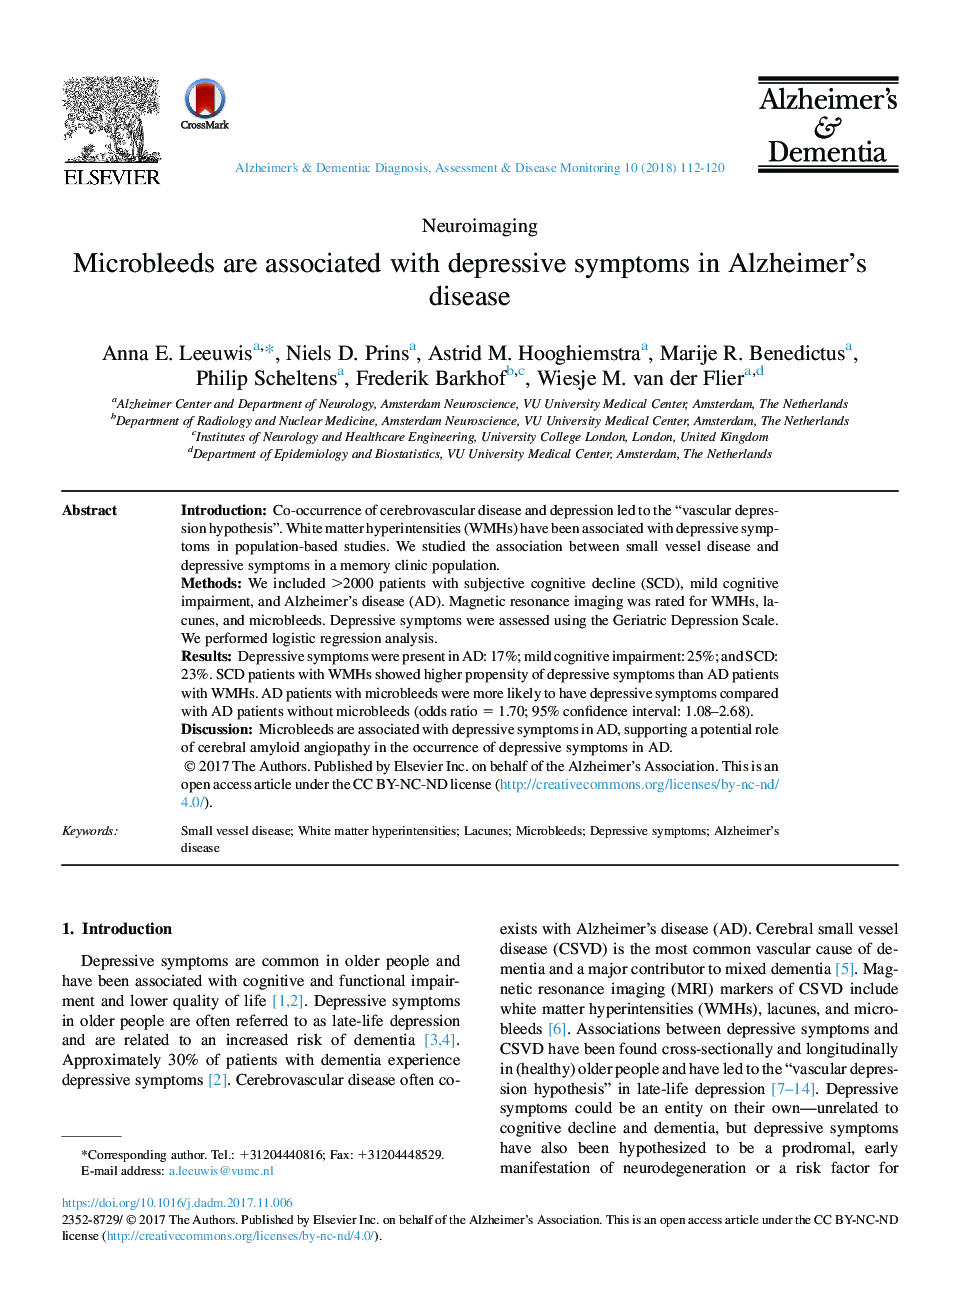 Microbleeds are associated with depressive symptoms in Alzheimer's disease